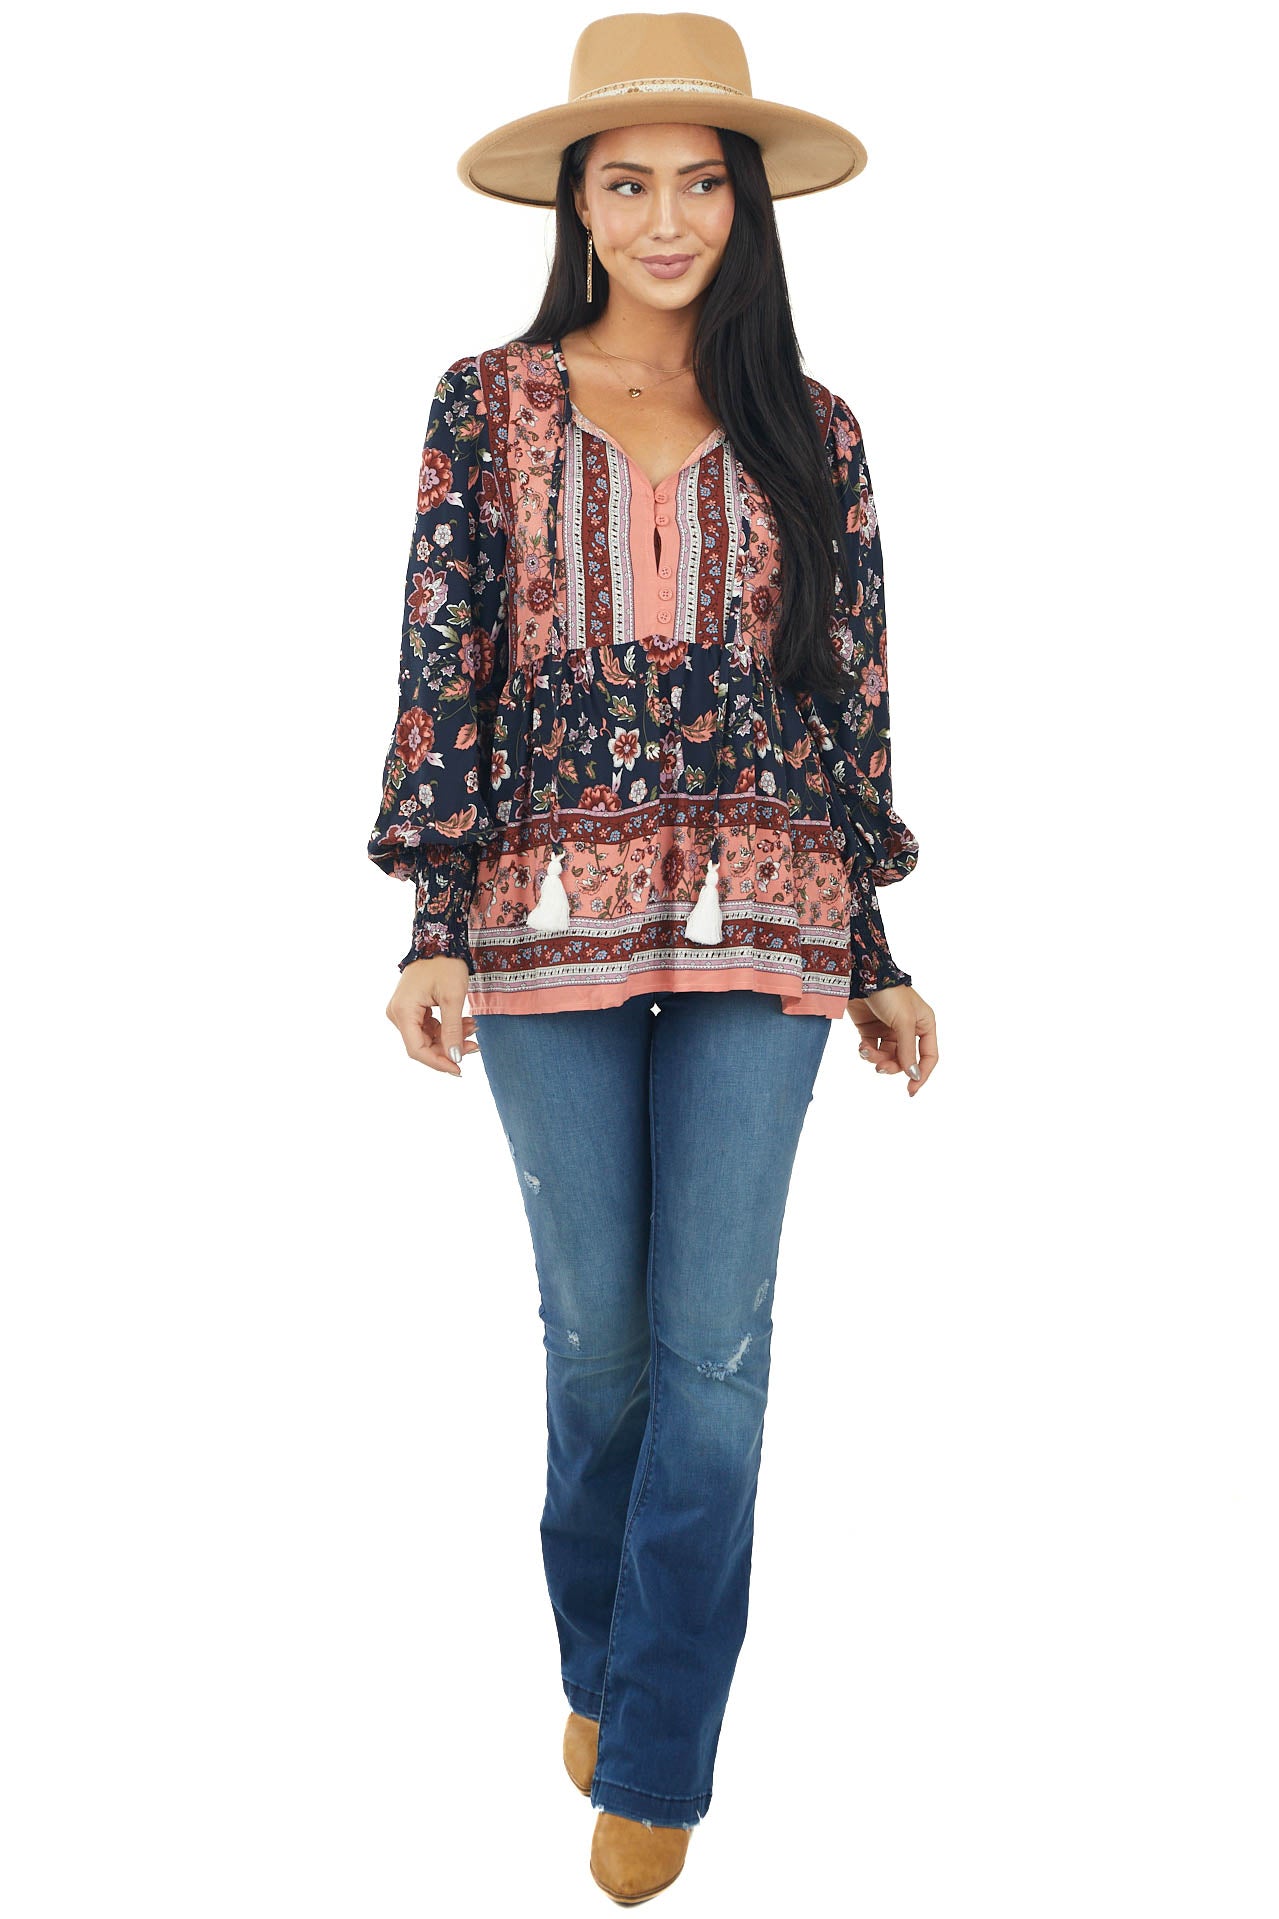 Navy and Coral Floral Print Drop Waist Blouse